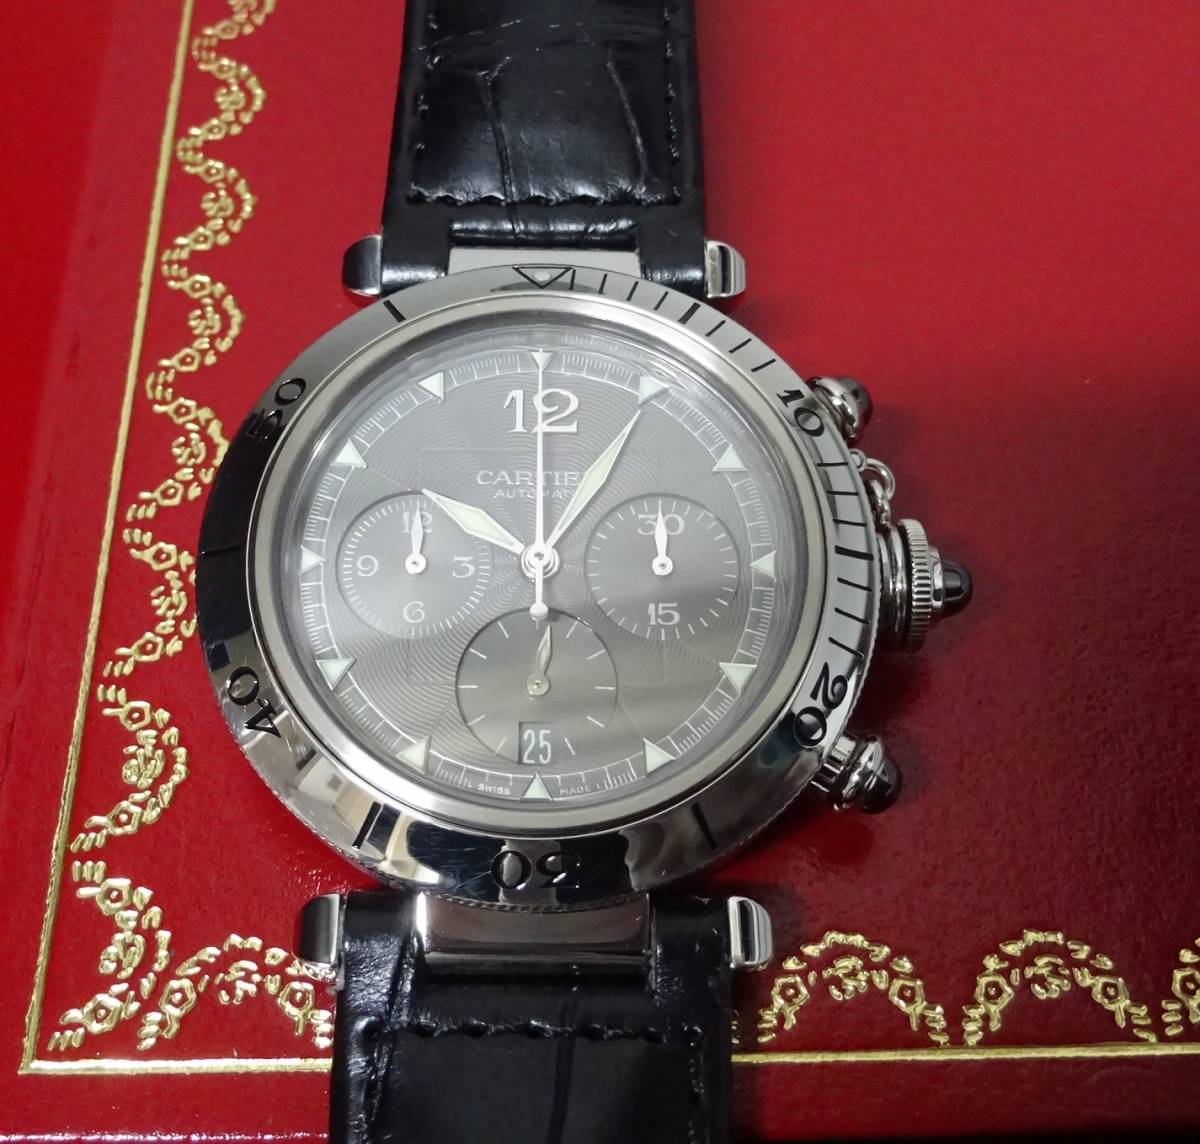 2023 year 5 month regular Complete execution 2004 year Christmas limitation Cartier Cartier Pacha 38 chronograph W3107355 self-winding watch gray men's genuine article 